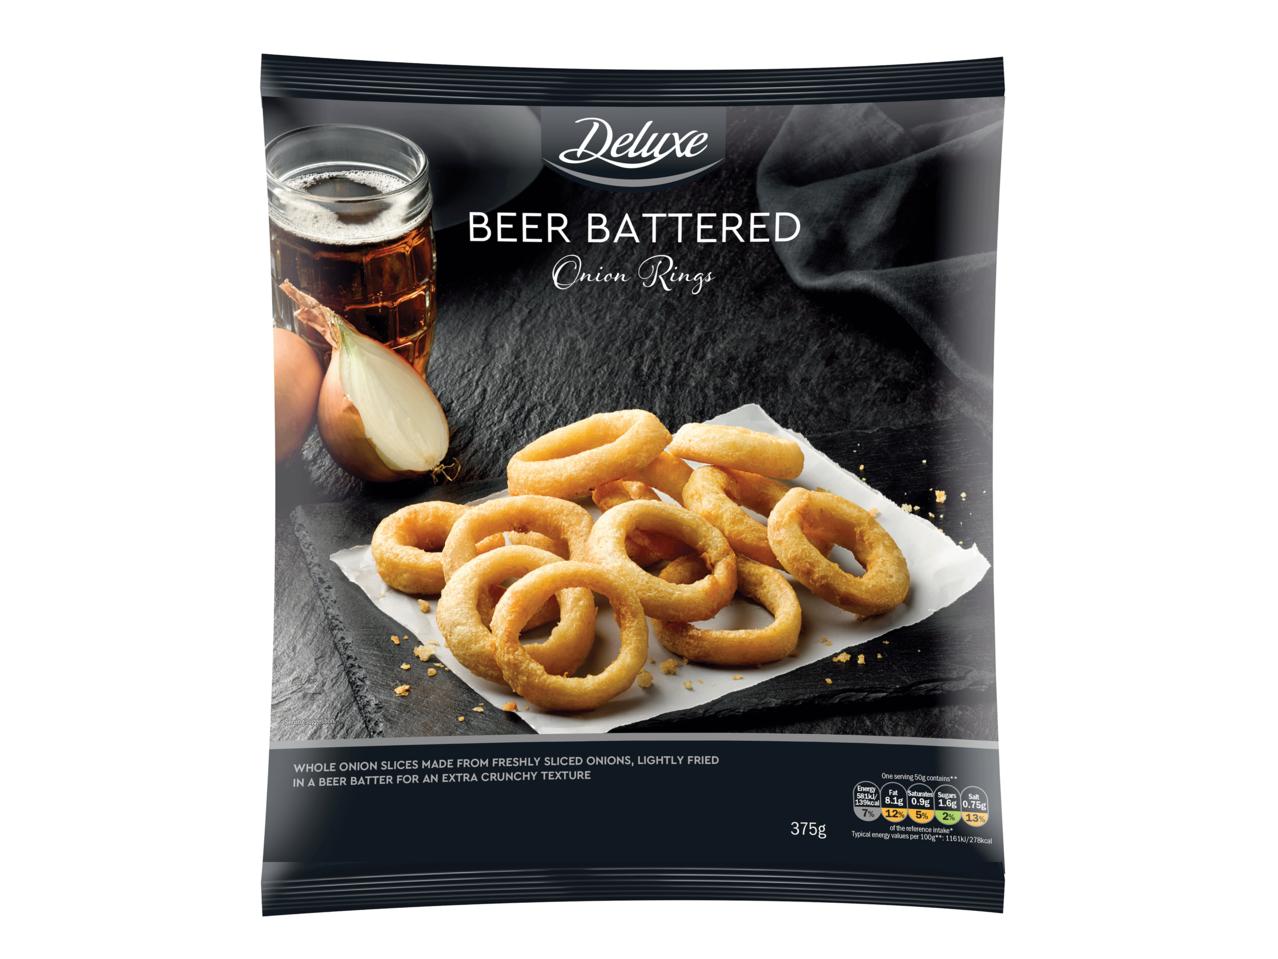 Deluxe Beer Battered Onion Rings